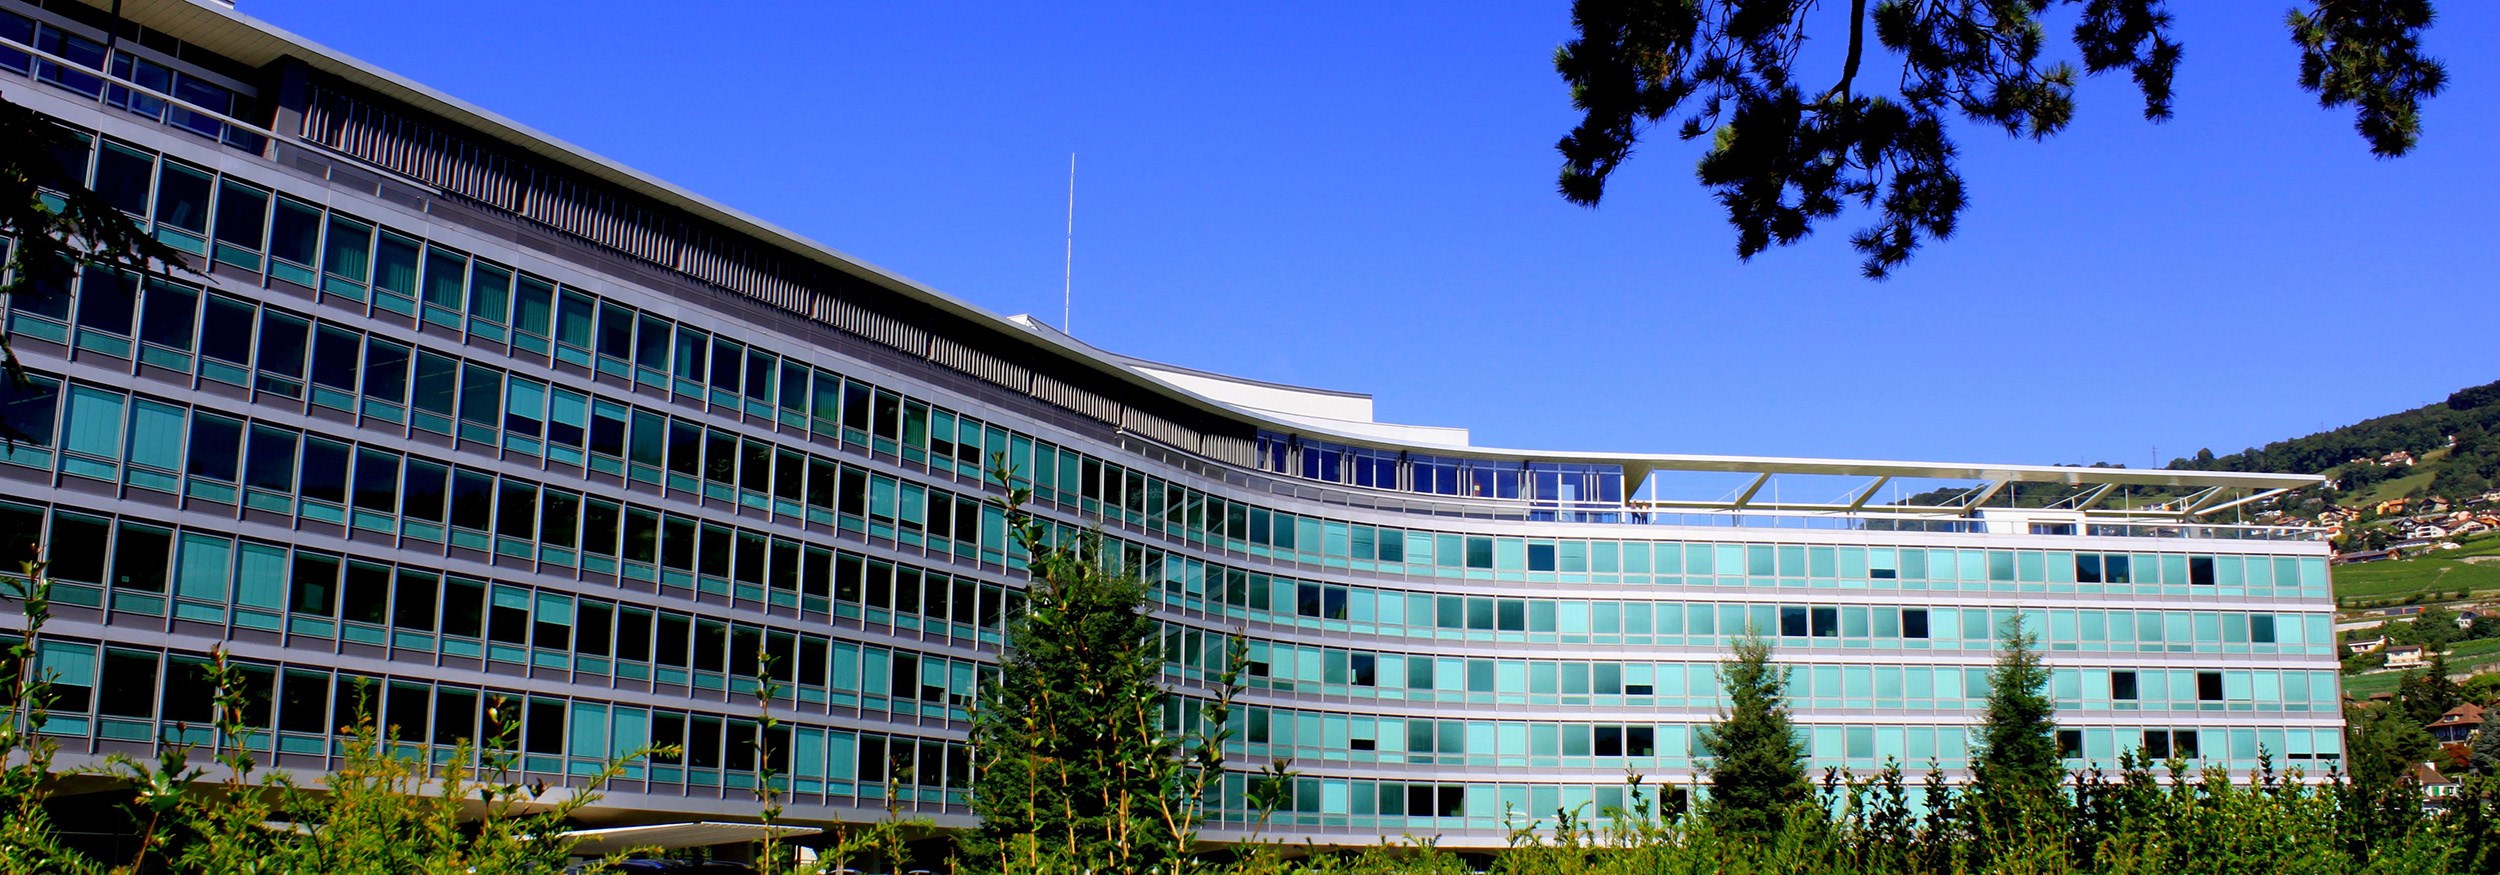 Nestlé is ranked the world’s most valuable food brand by Brand Finance. The picture shows the company's HQ in Vevey, Switzerland. Nestlé press photo